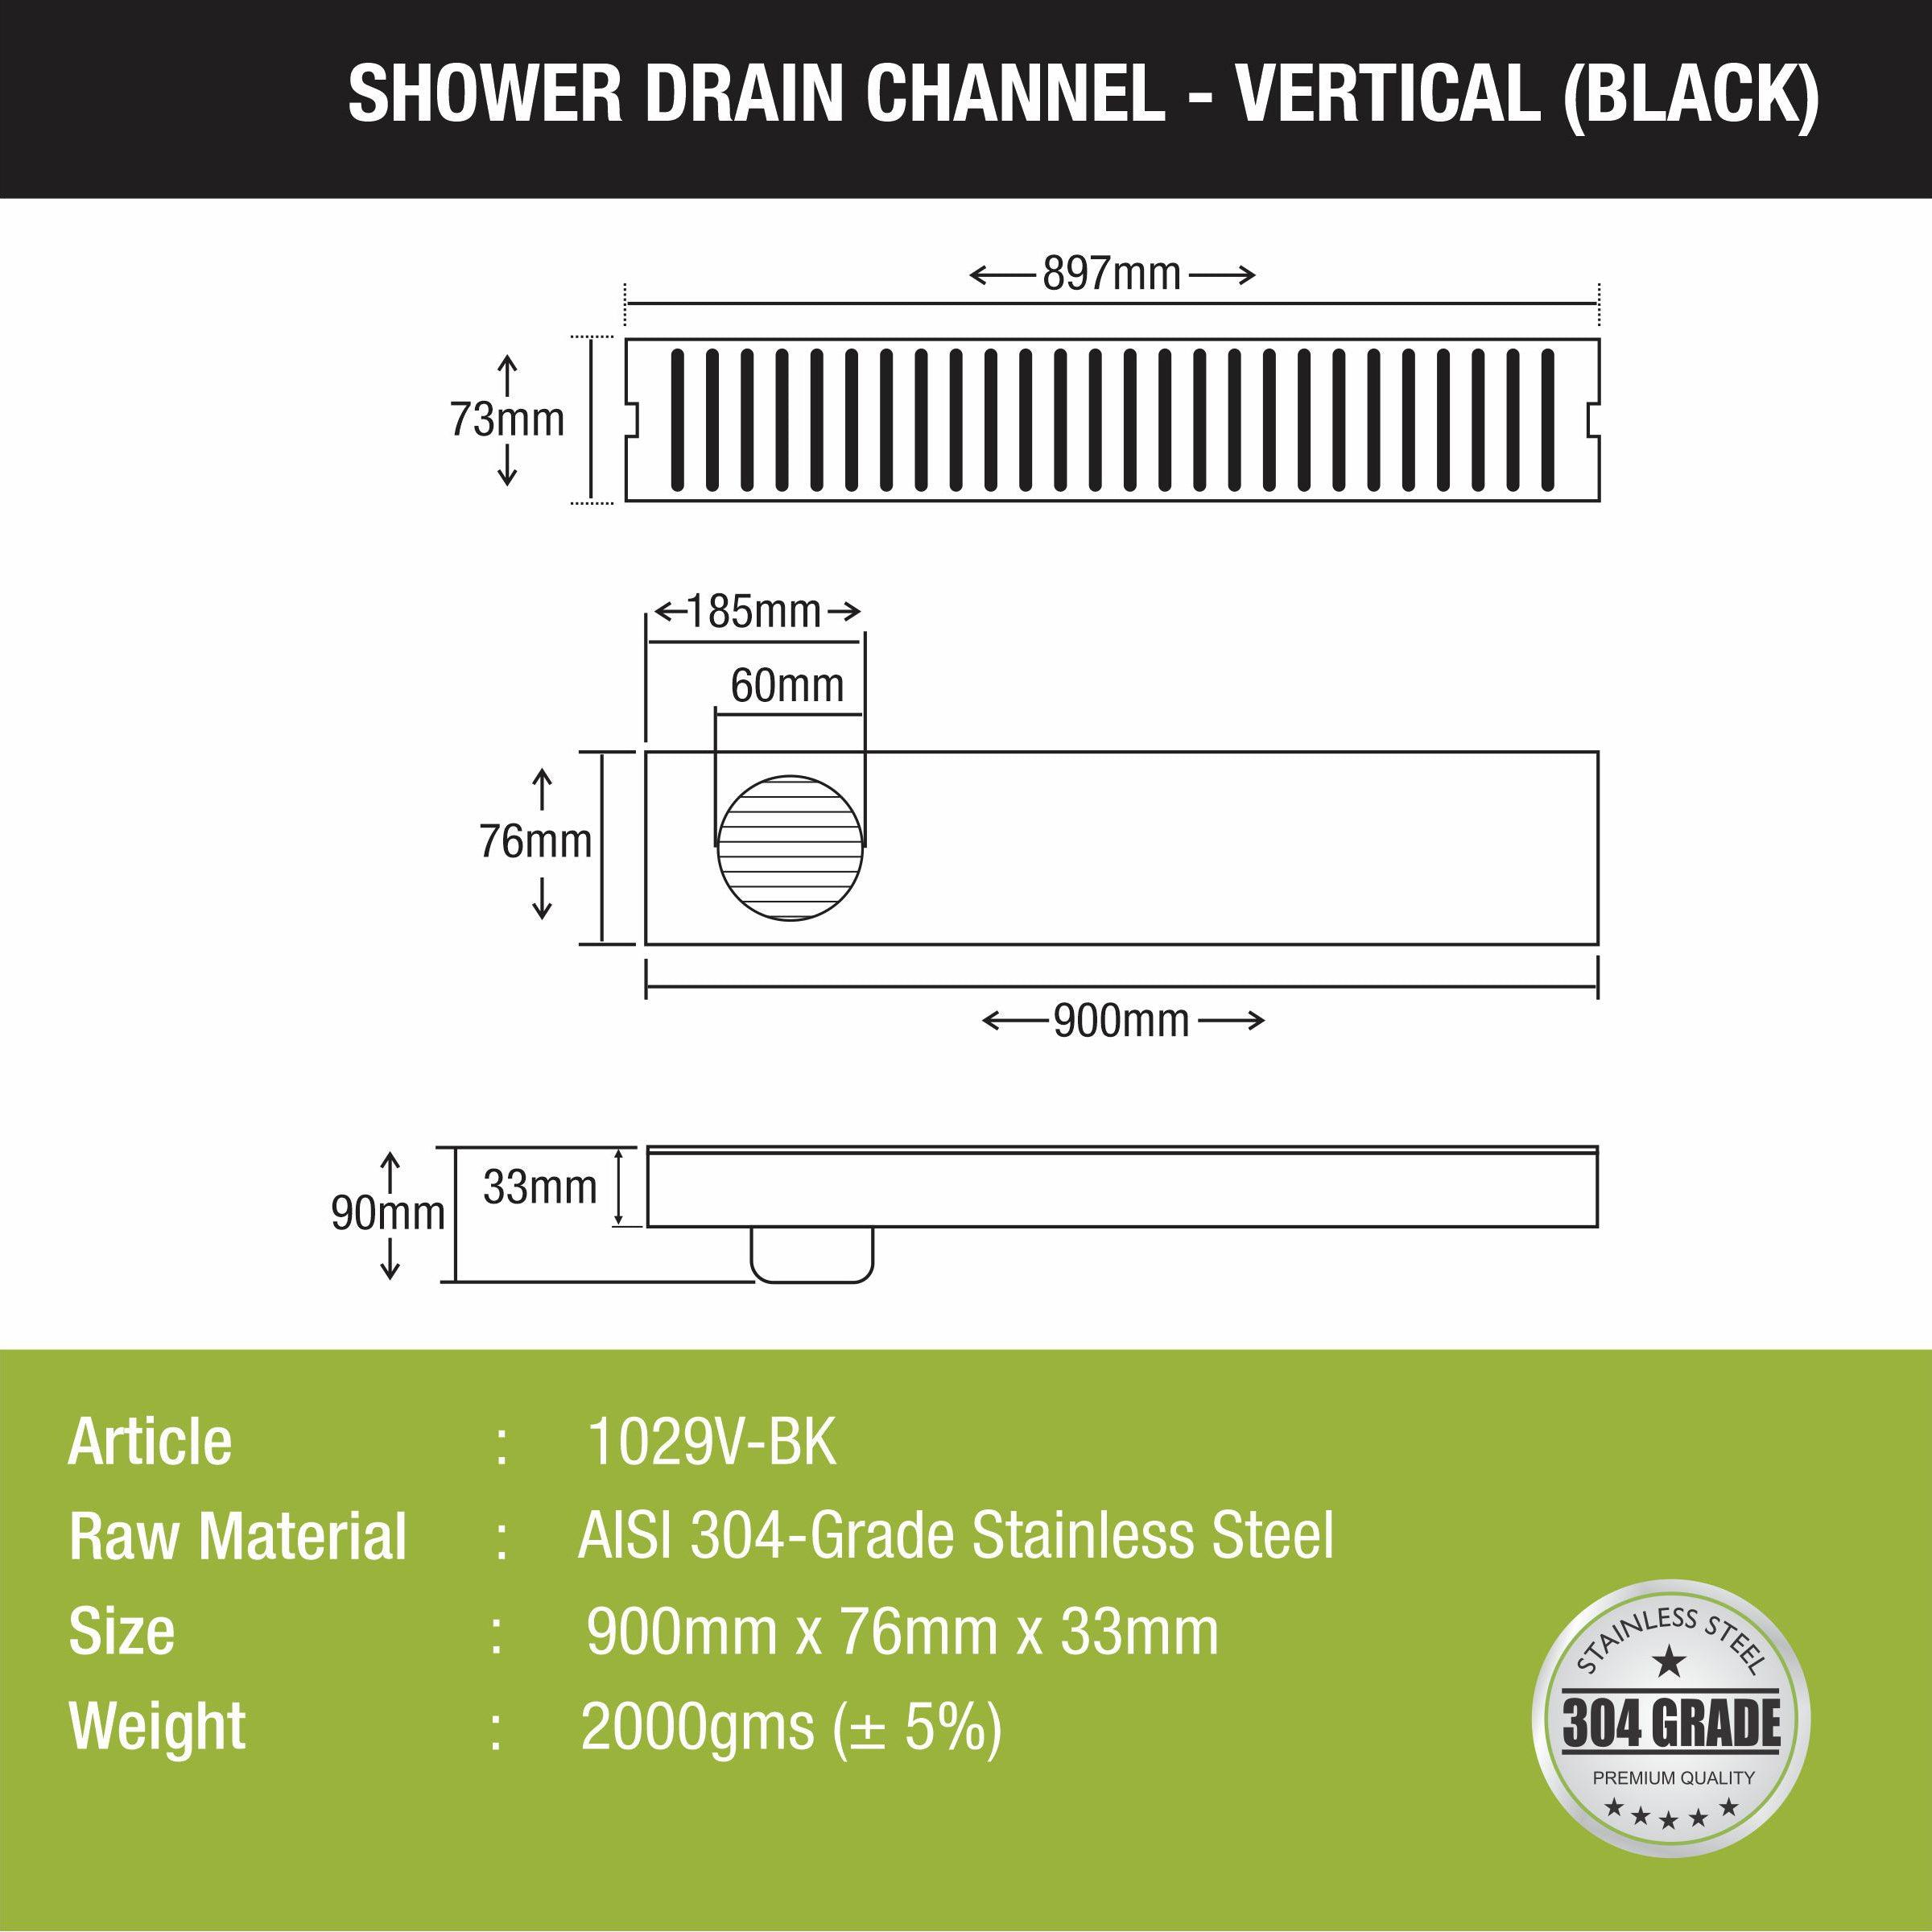 Vertical Shower Drain Channel - Black (36 x 3 Inches) size and measurement 